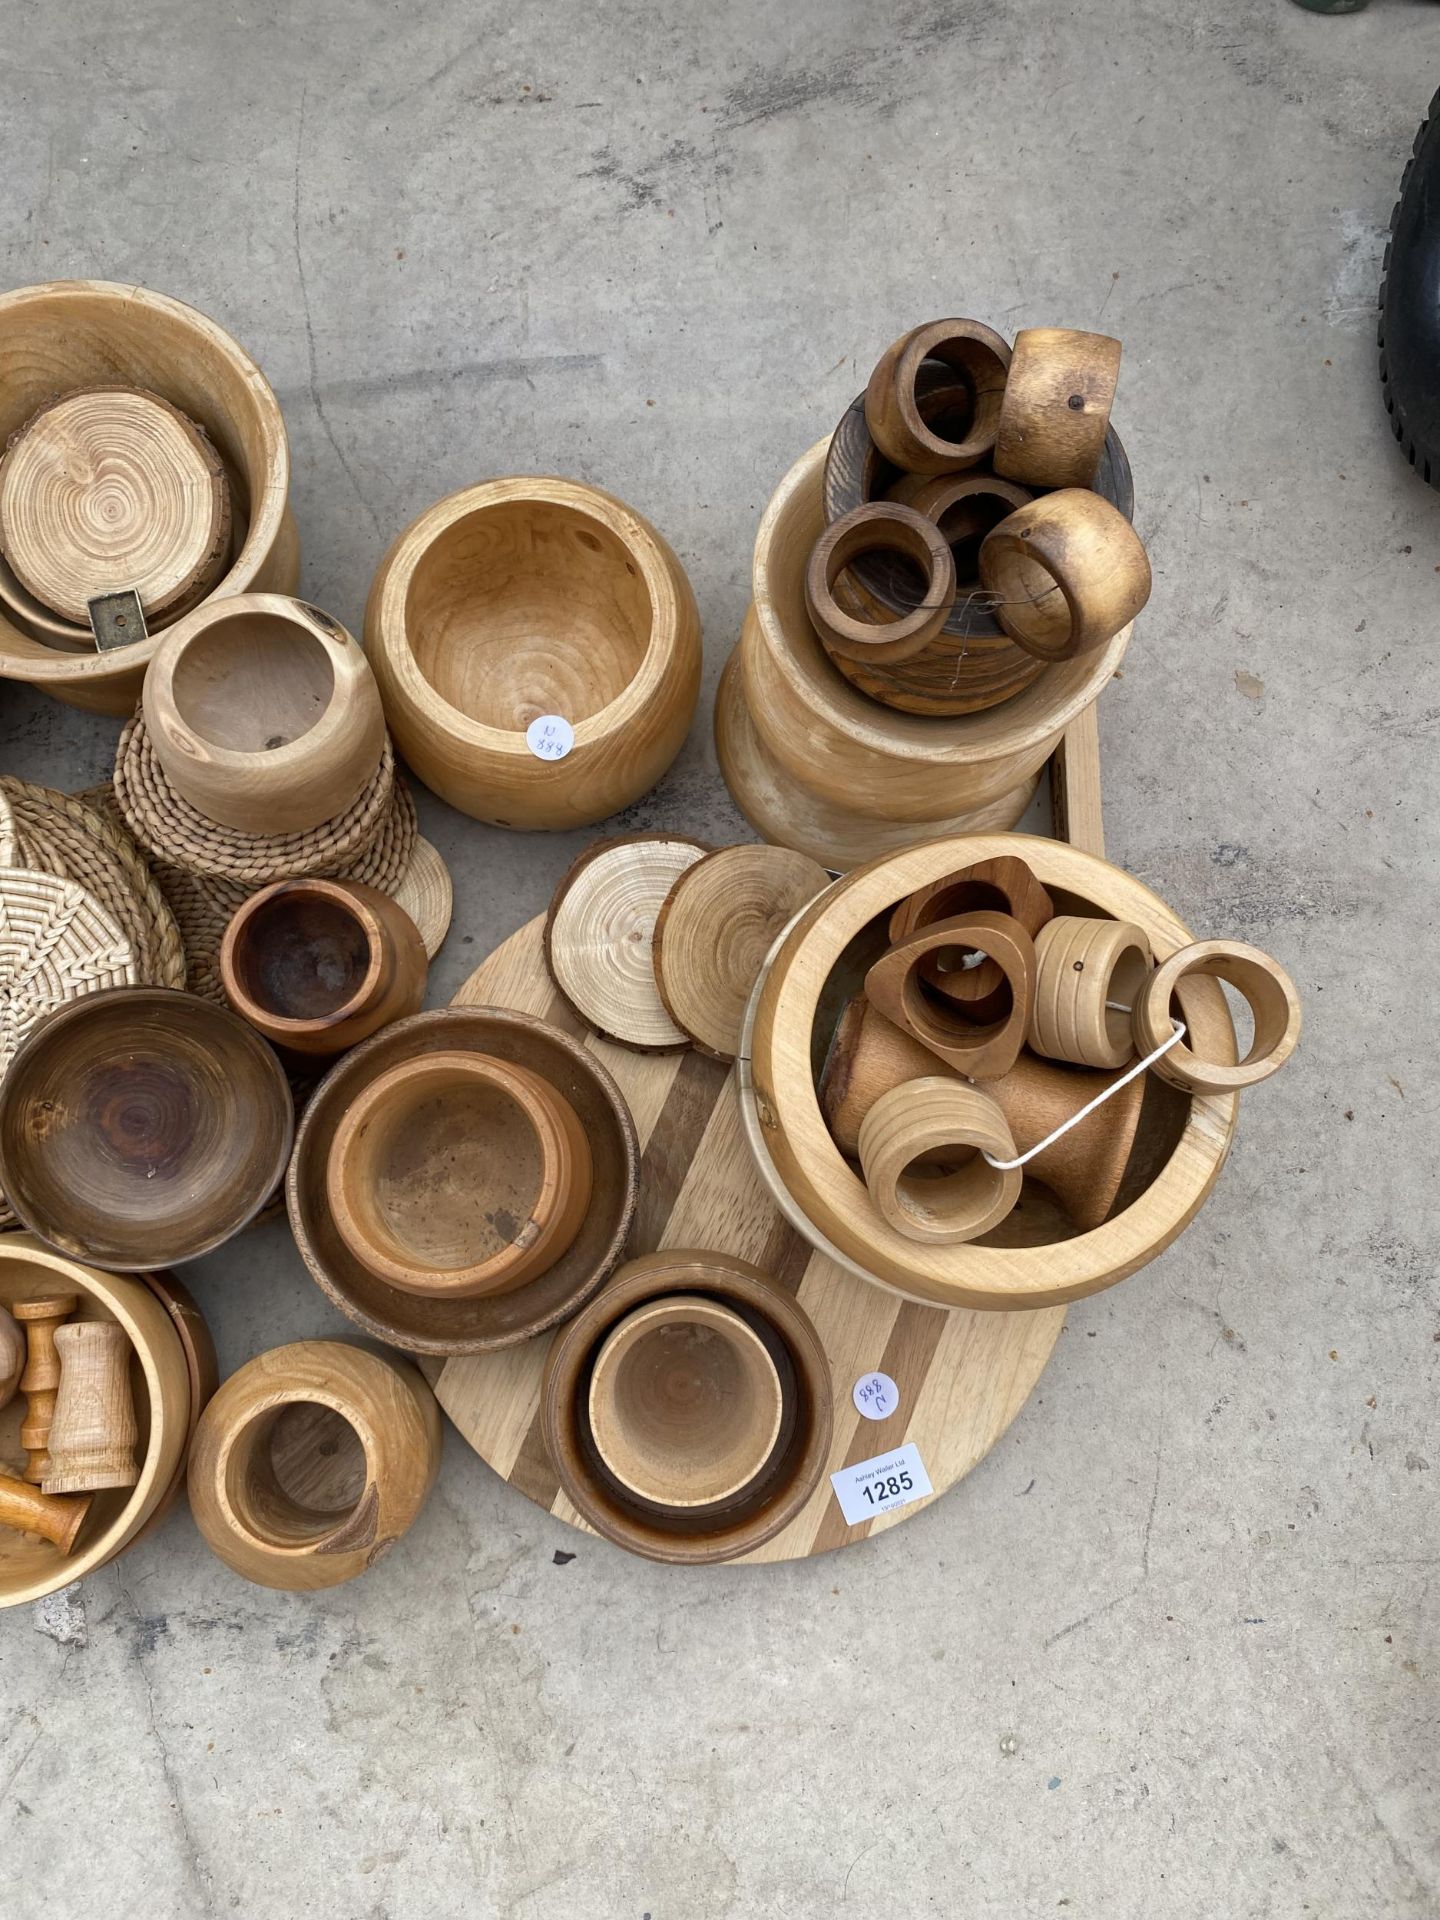 A LARGE ASSORTMENT OF TURNED TREEN ITEMS TO INCLUDE BOWLS, VASES AND NAPKIN RINGS ETC - Image 4 of 4